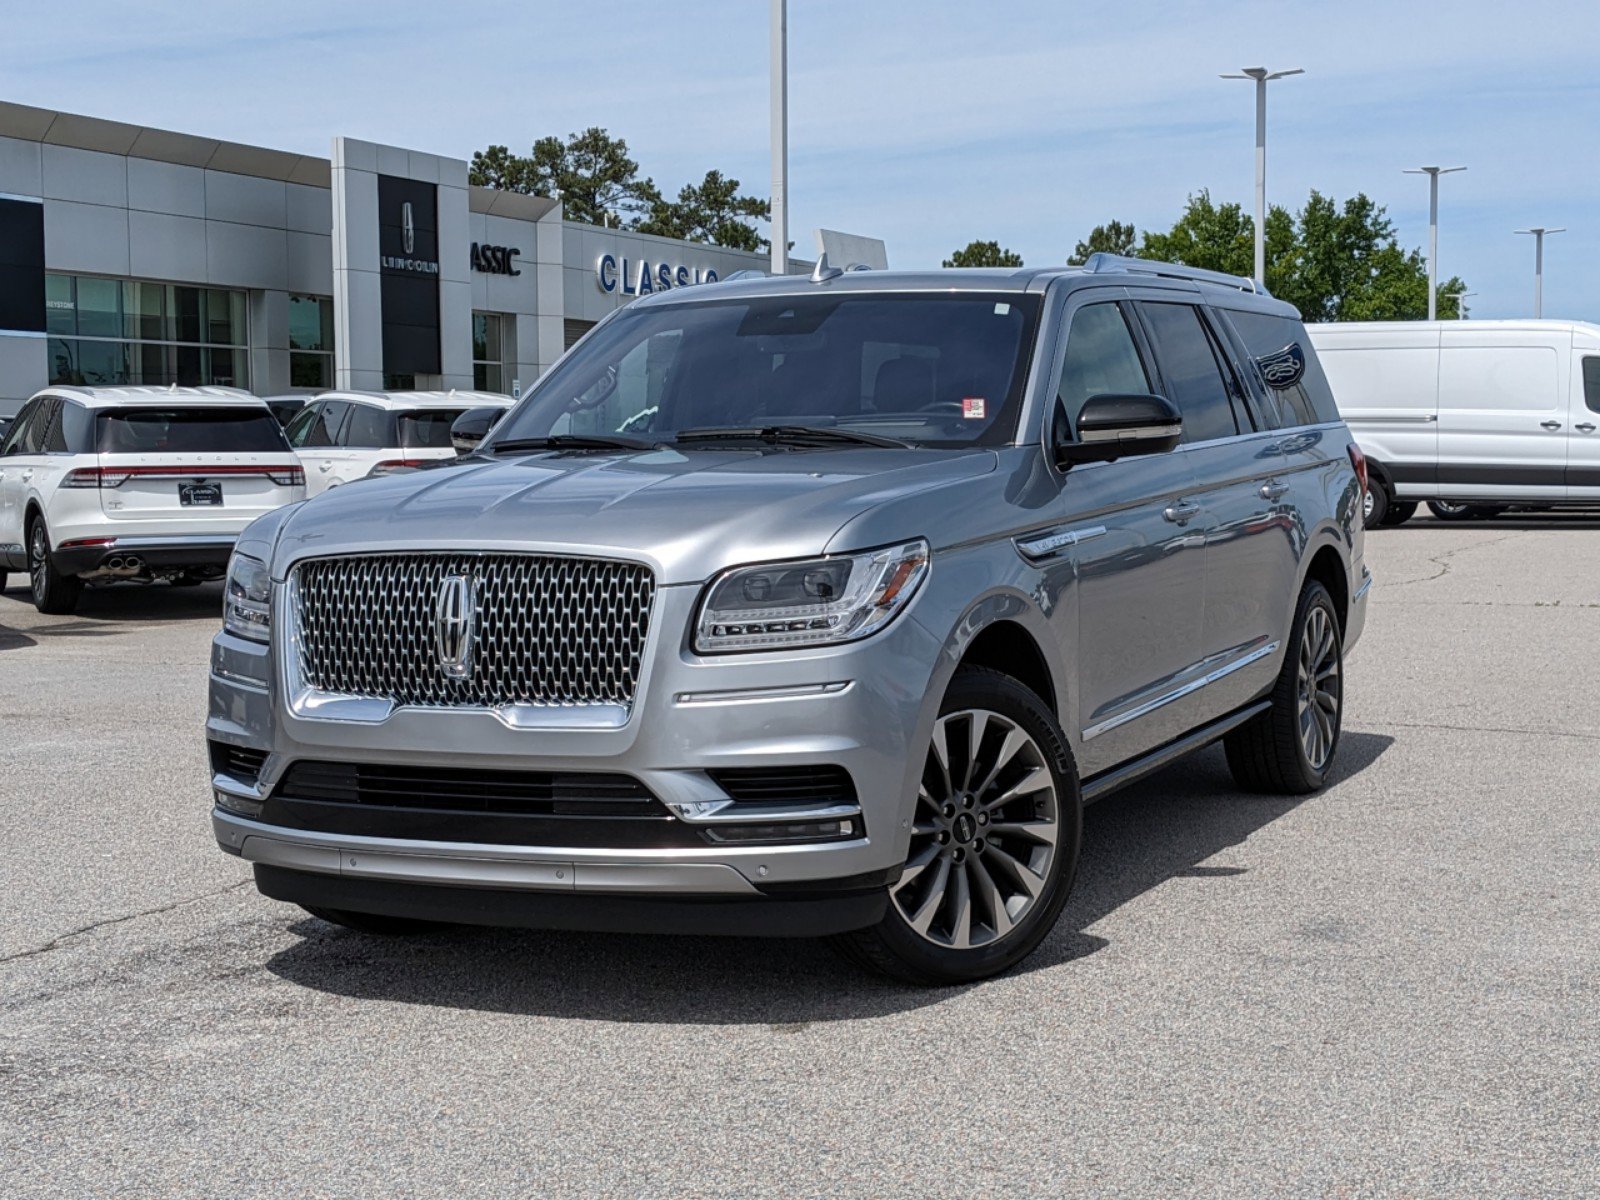 Pre-Owned 2020 Lincoln Navigator L Reserve Sport Utility in Smithfield  #15623A | Classic Ford of Smithfield